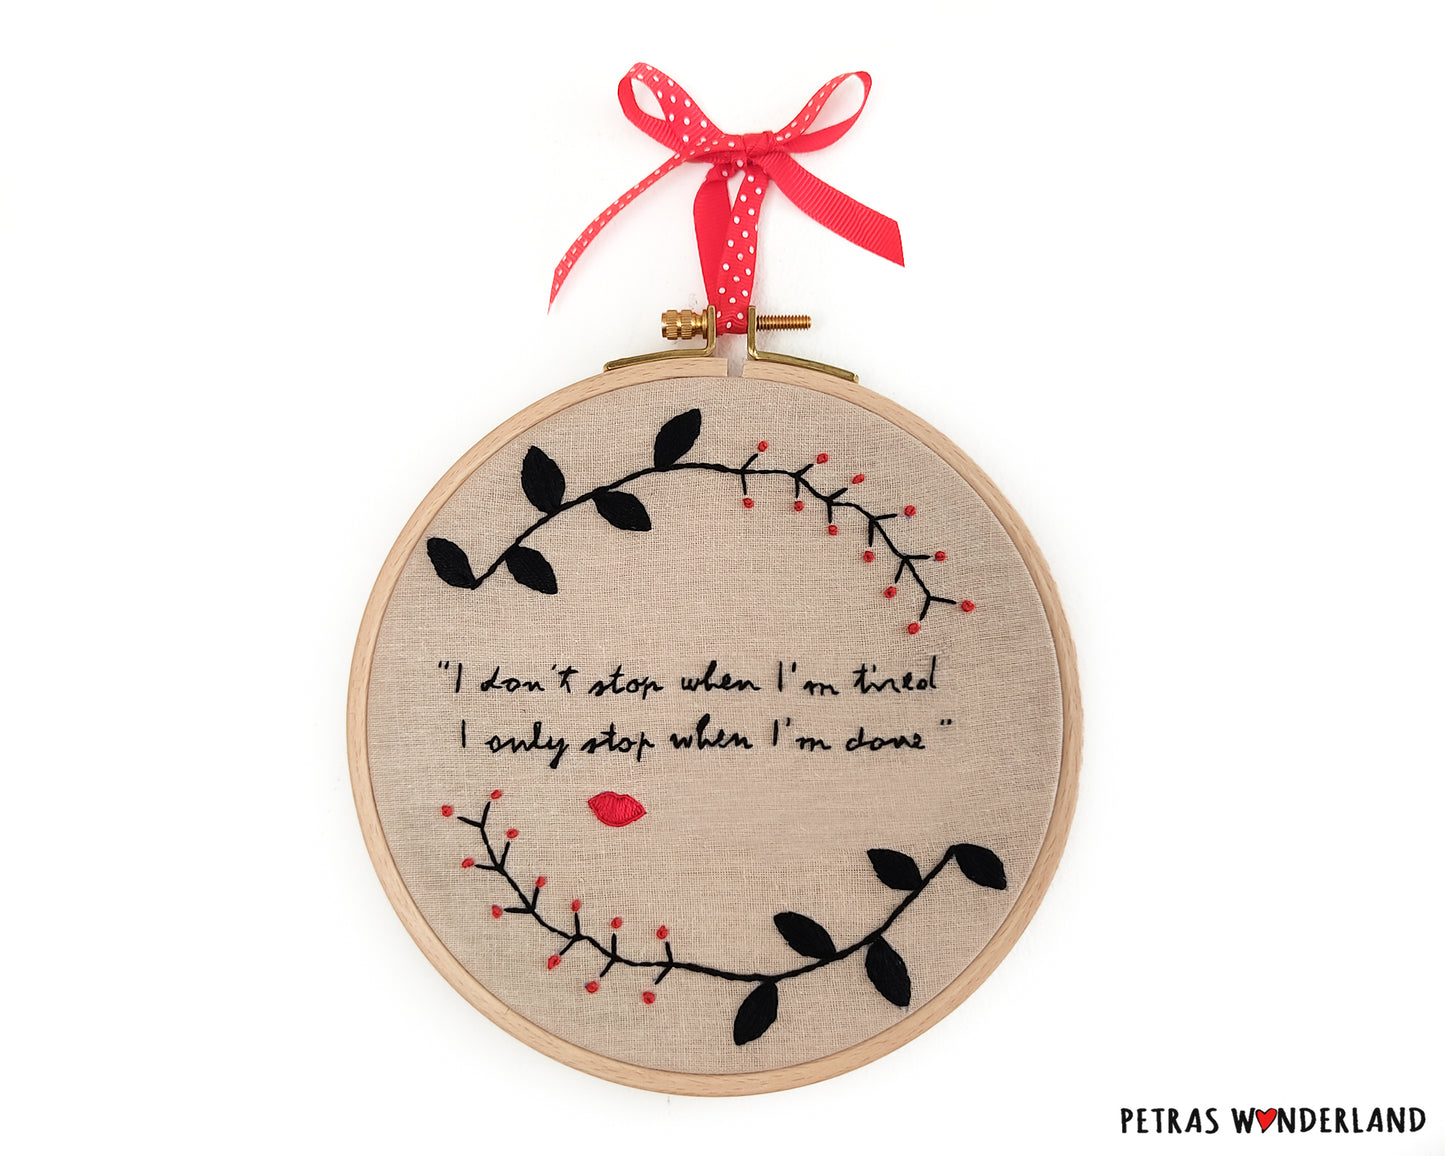 Actress Quote - PDF embroidery pattern and tutorial 02